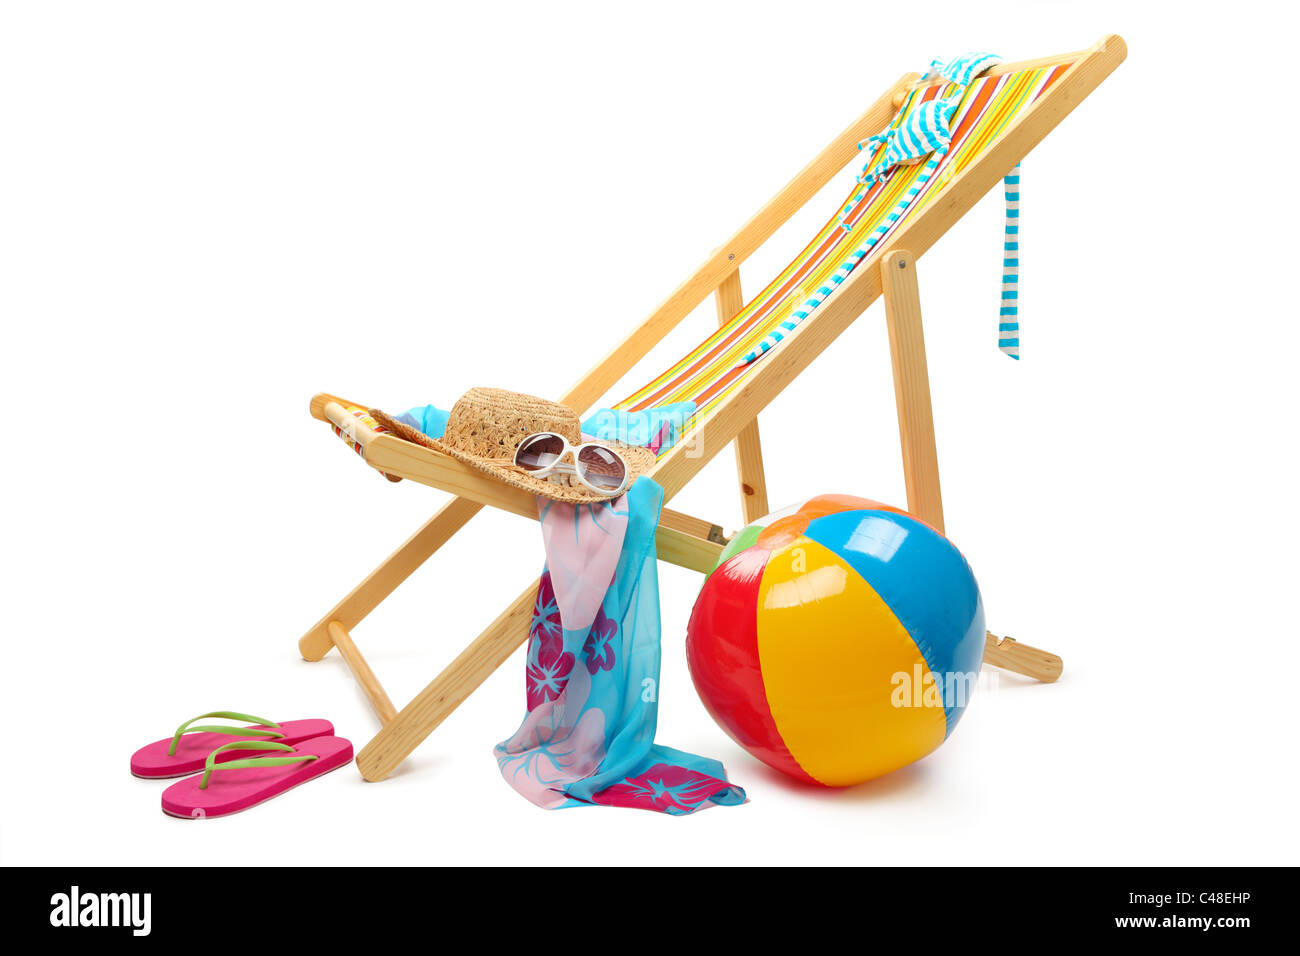 Beach chair and accessories isolated on white background. Stock Photo